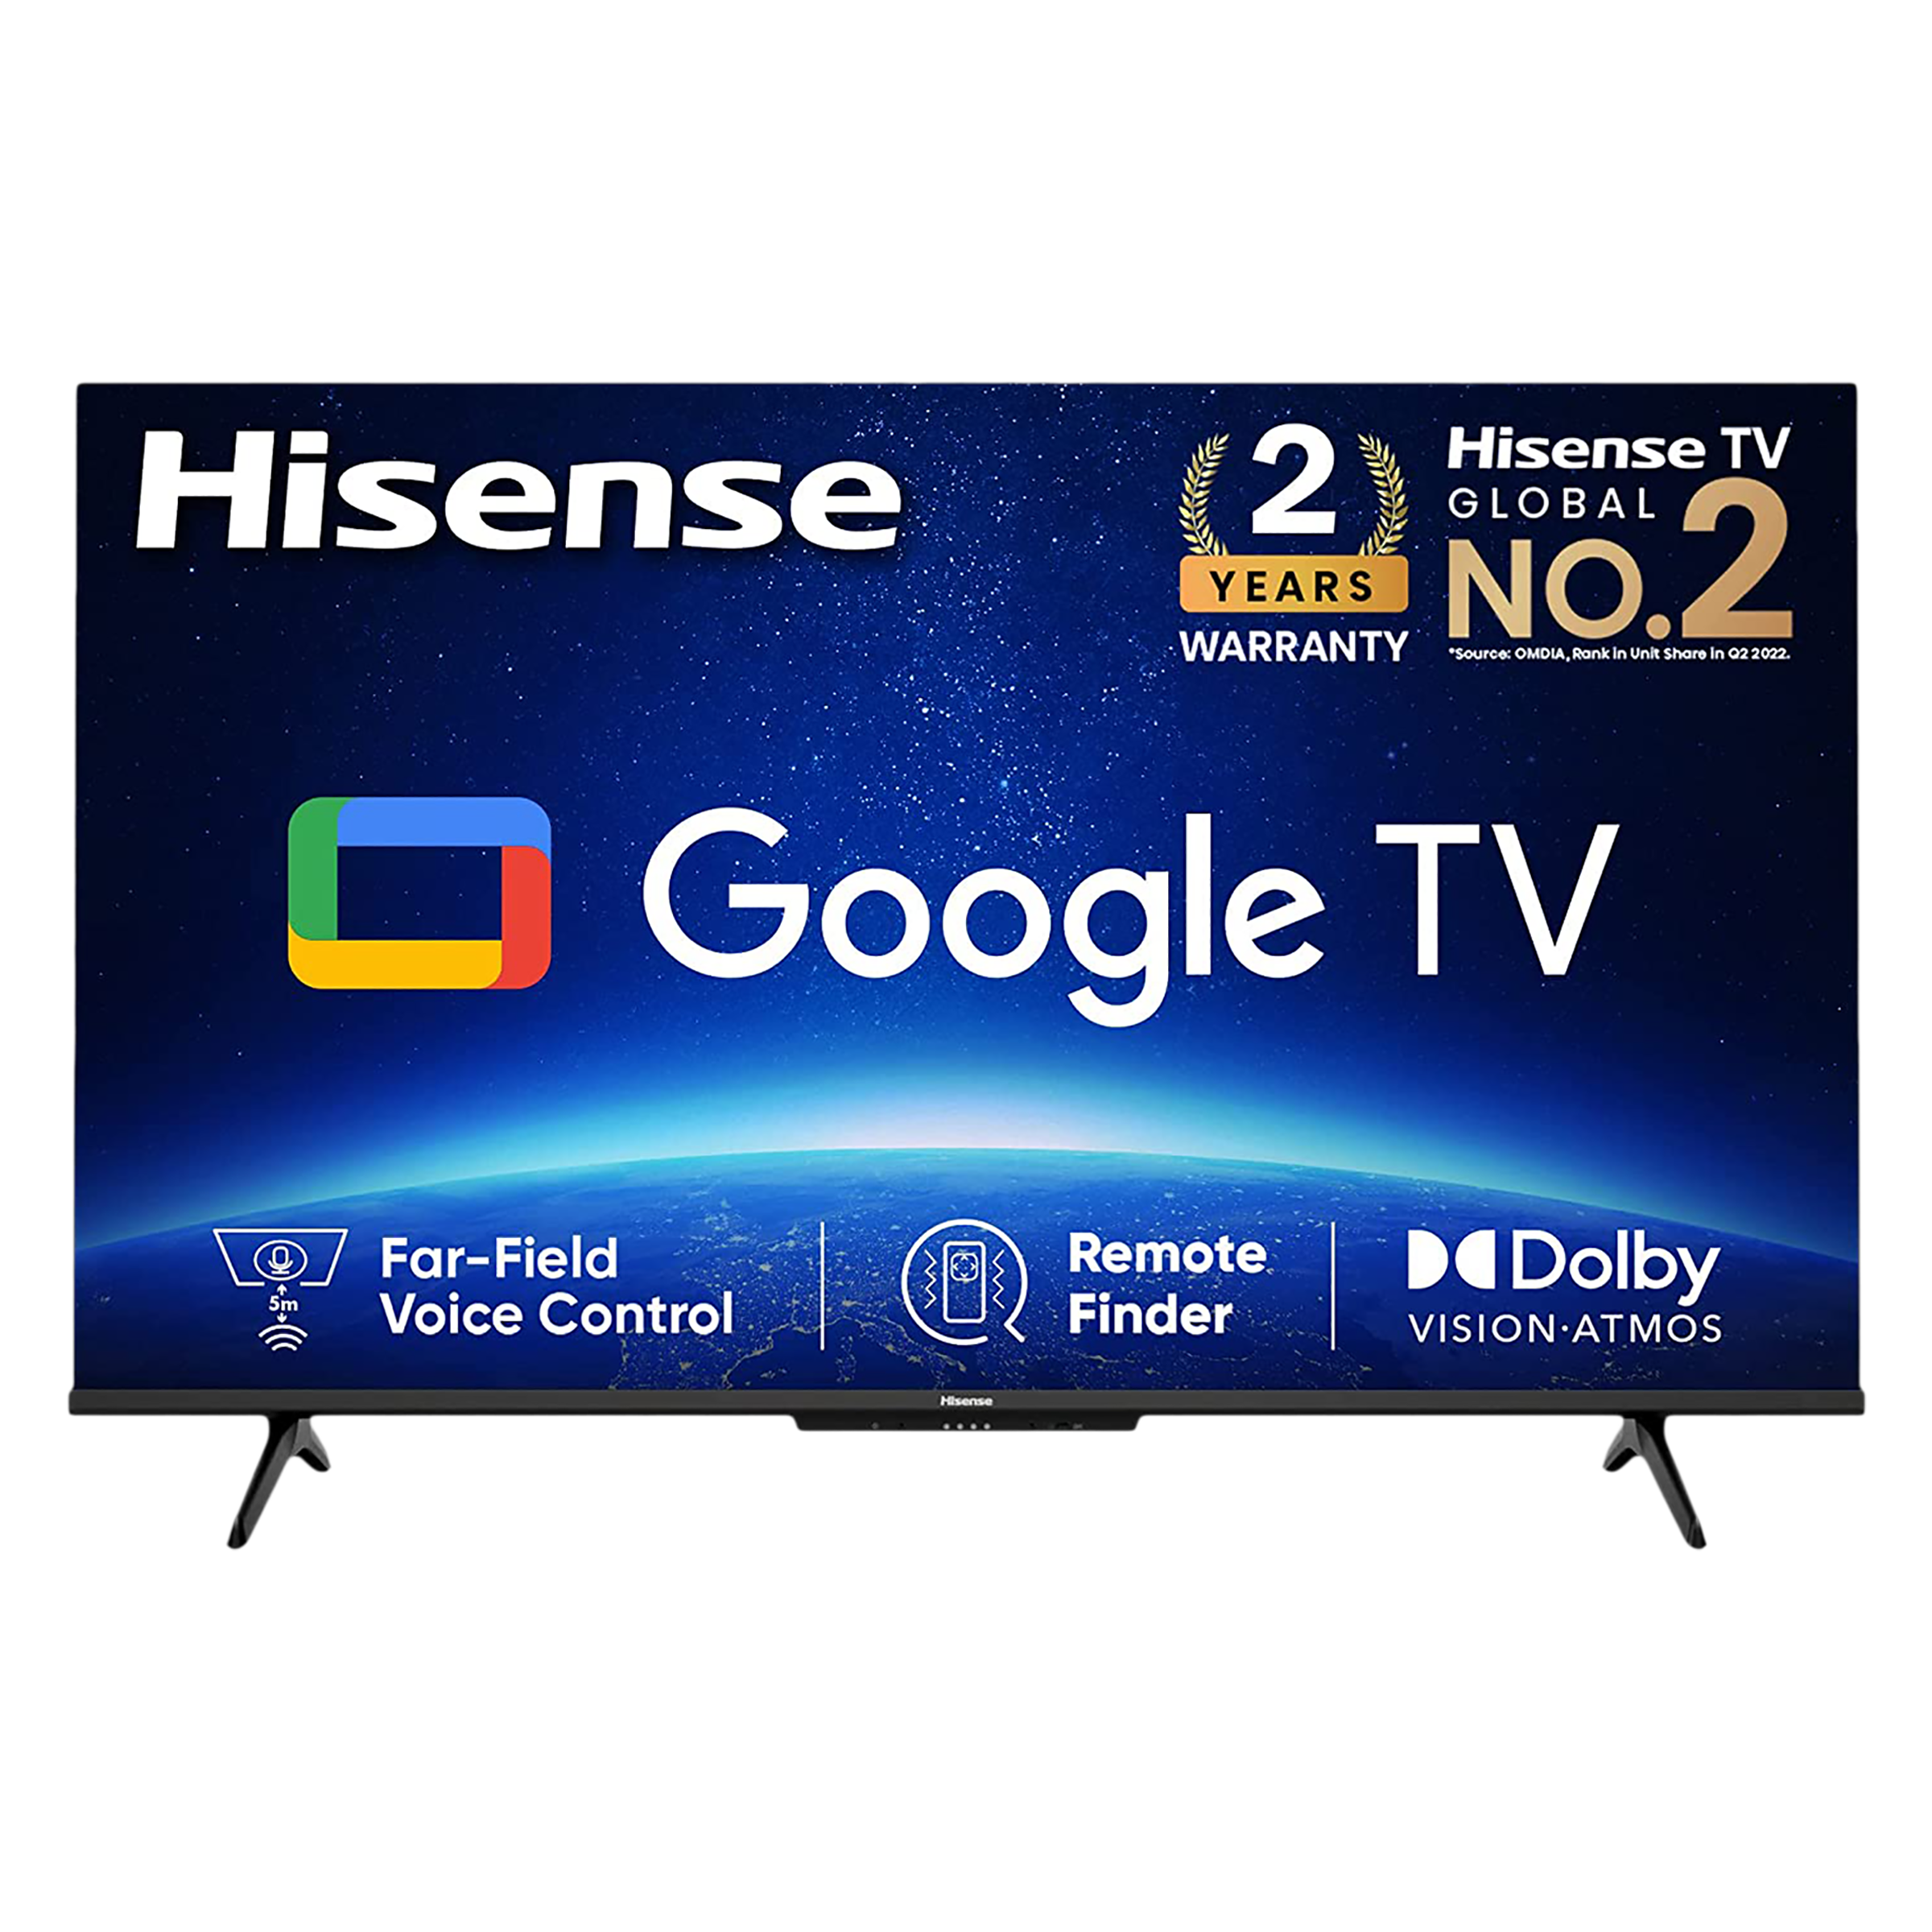 Buy Hisense A6H 139 cm (55 inch) 4K Ultra HD LED Google TV with Dolby Vision (2022 model) Online - Croma